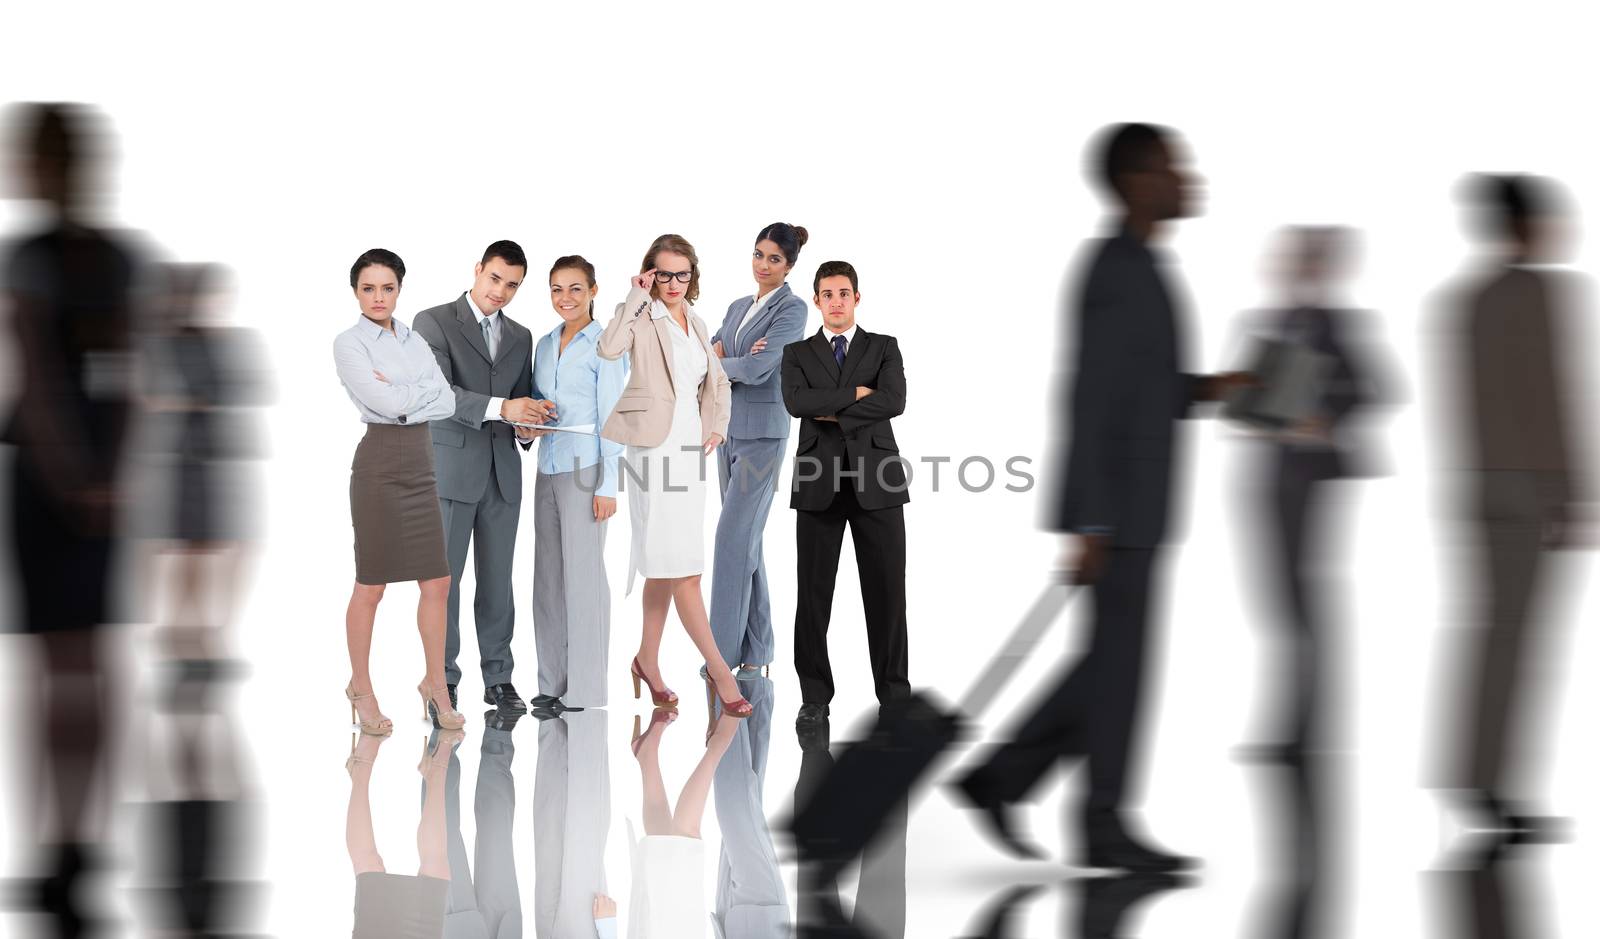 Composite image of business people by Wavebreakmedia